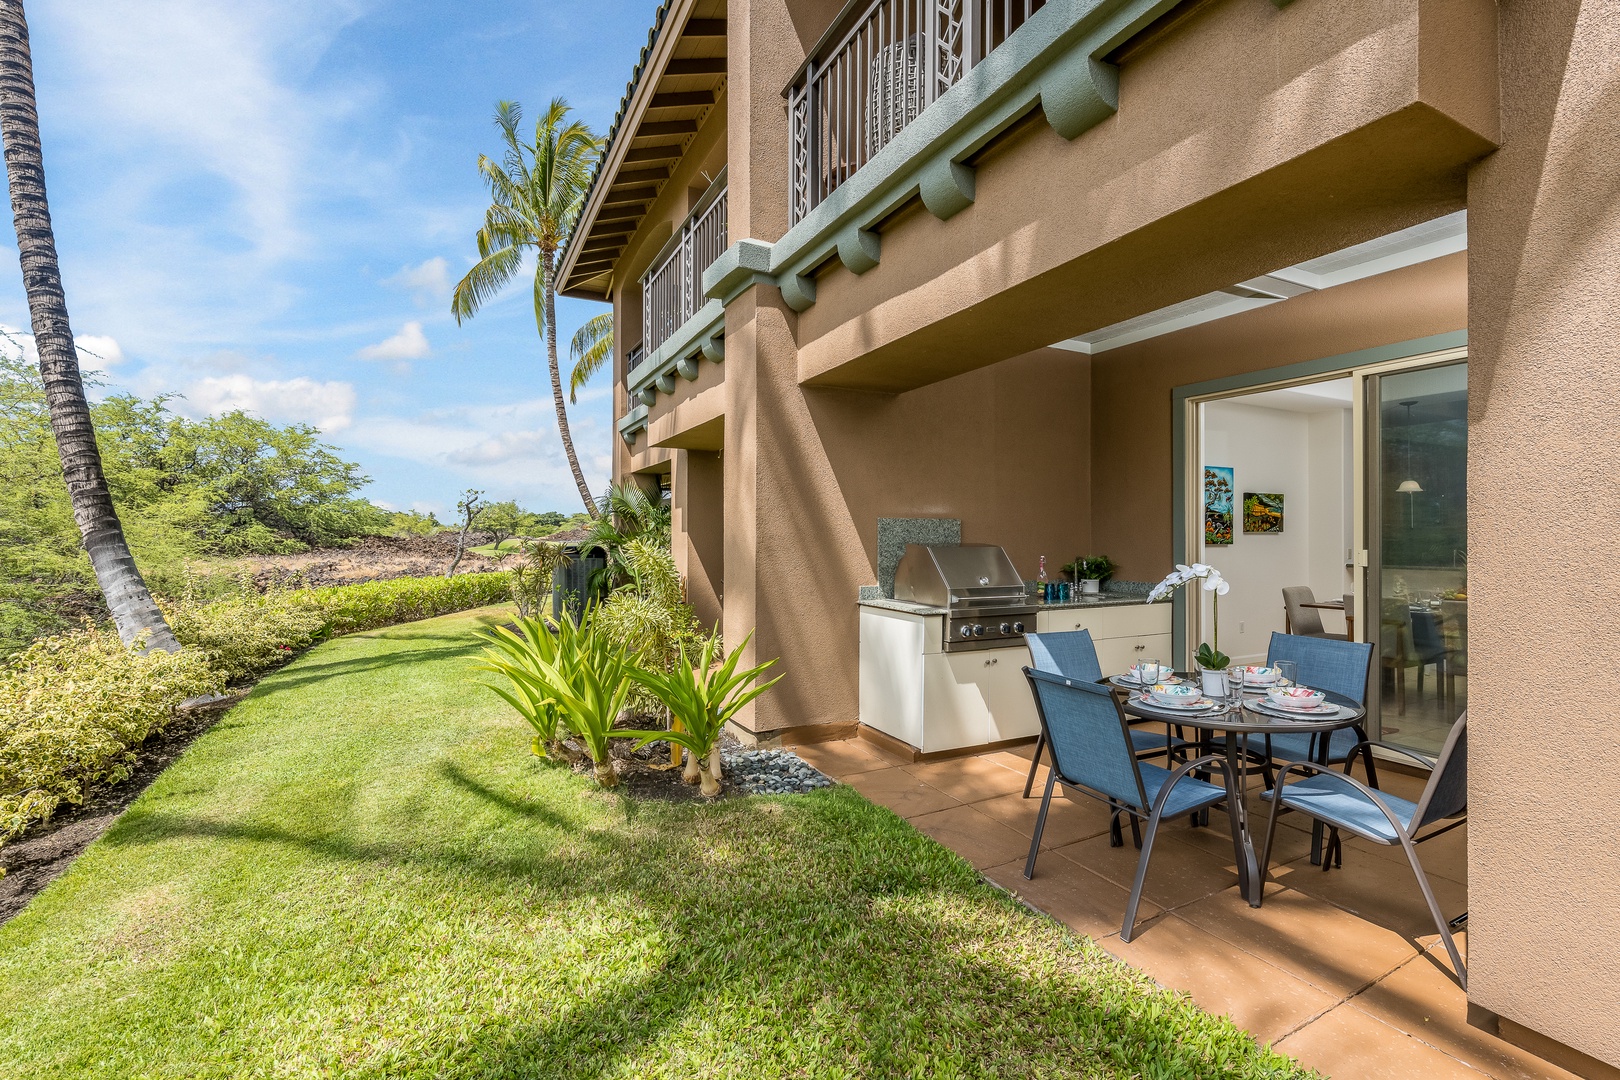 Kamuela Vacation Rentals, Mauna Lani Fairways #603 - Dine indoors, then step out to the patio for BBQ delights.